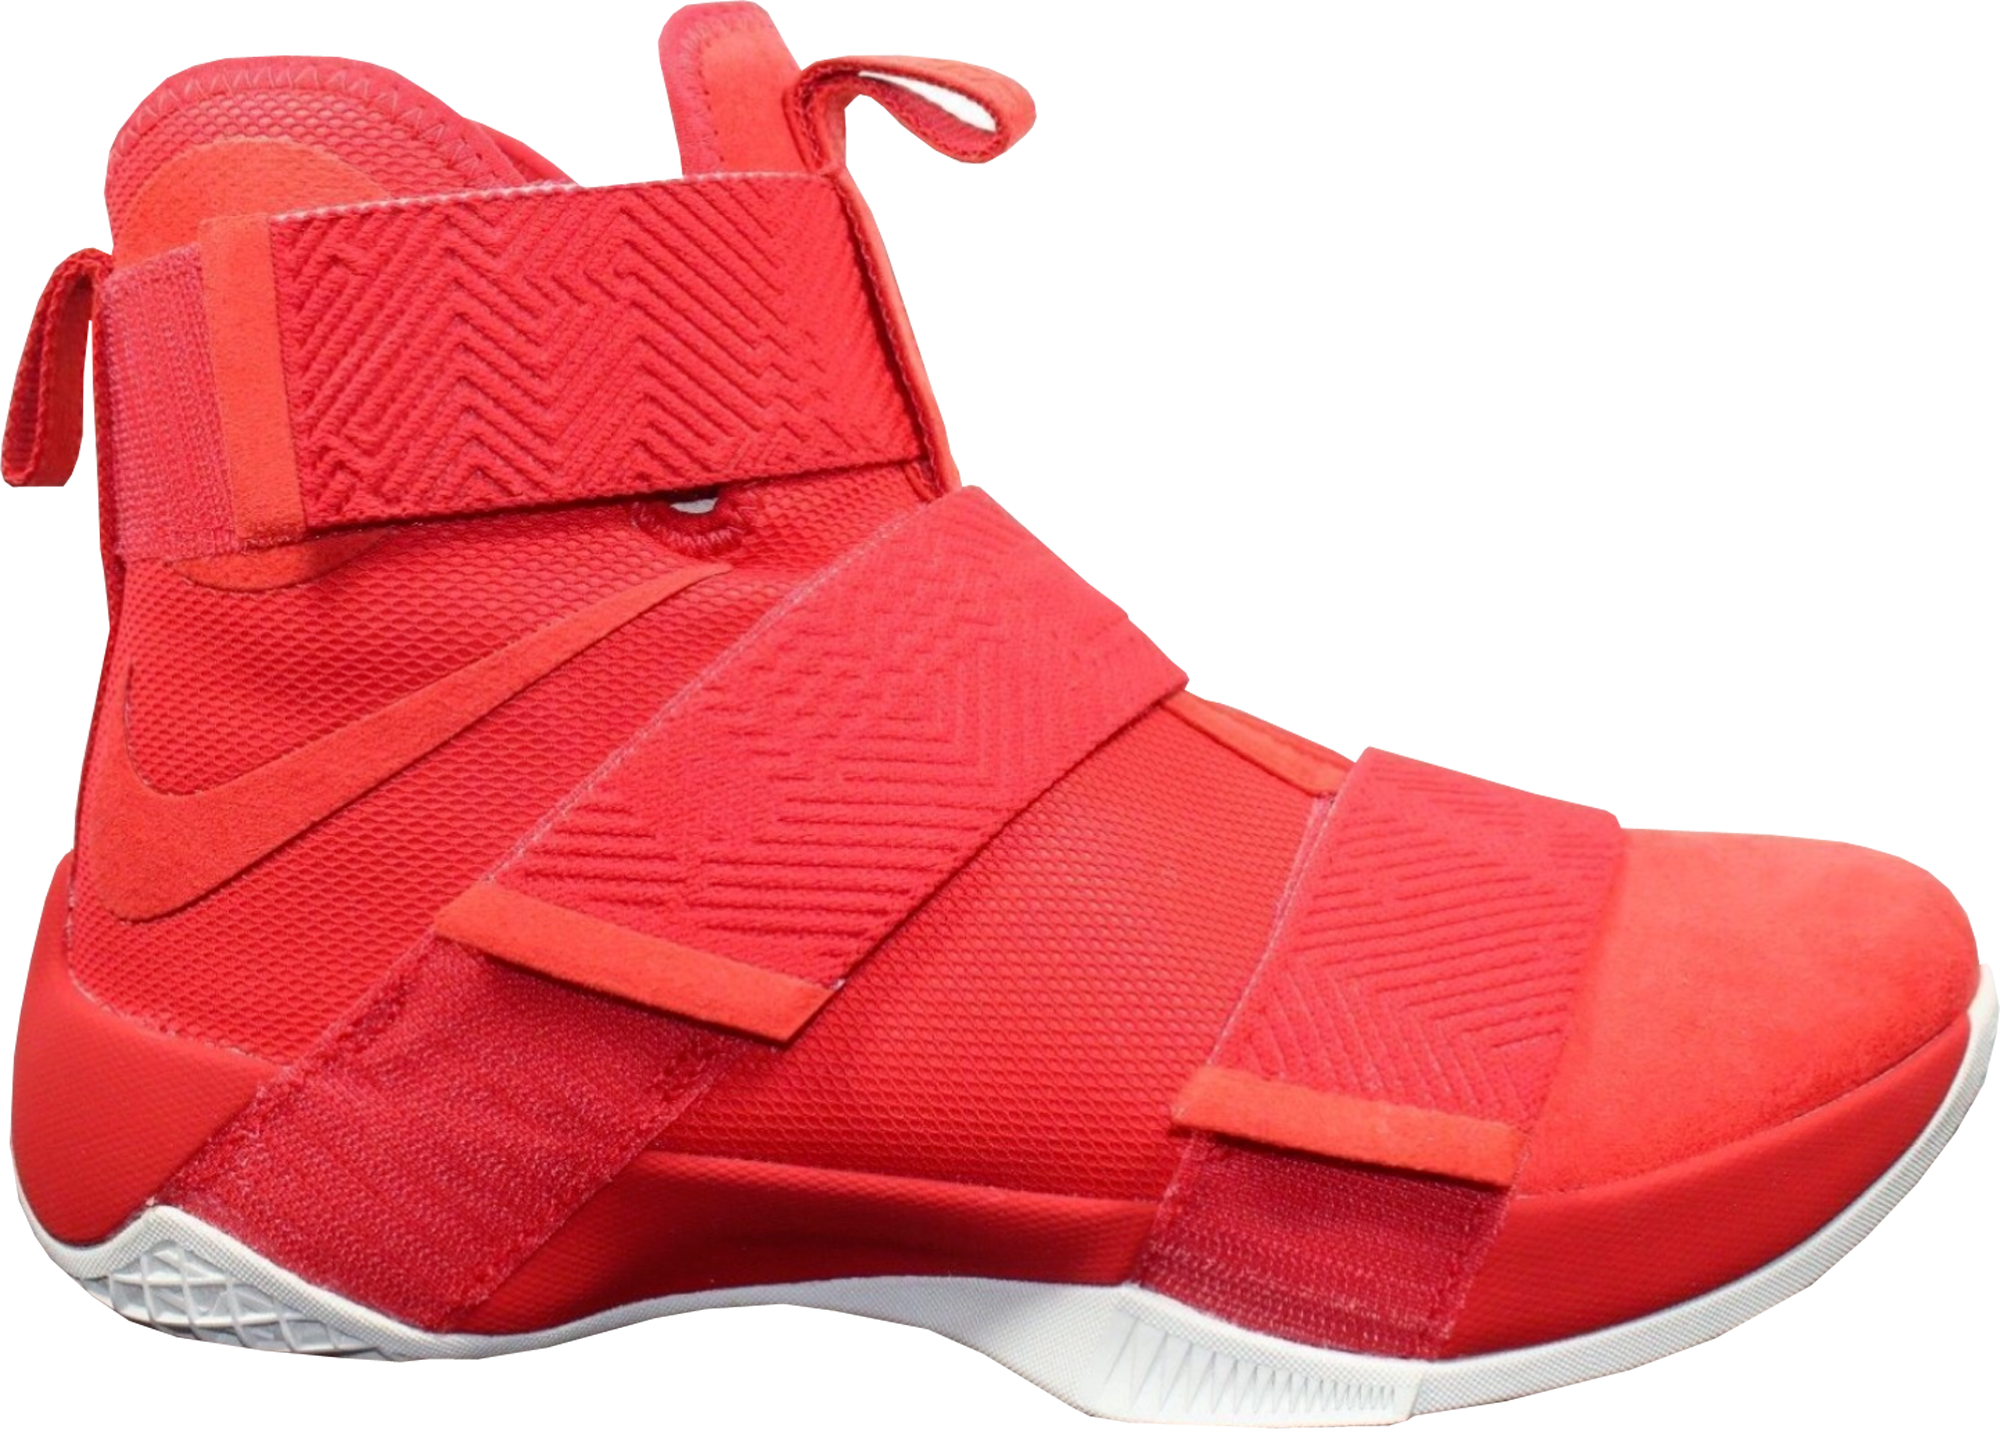 all red lebron